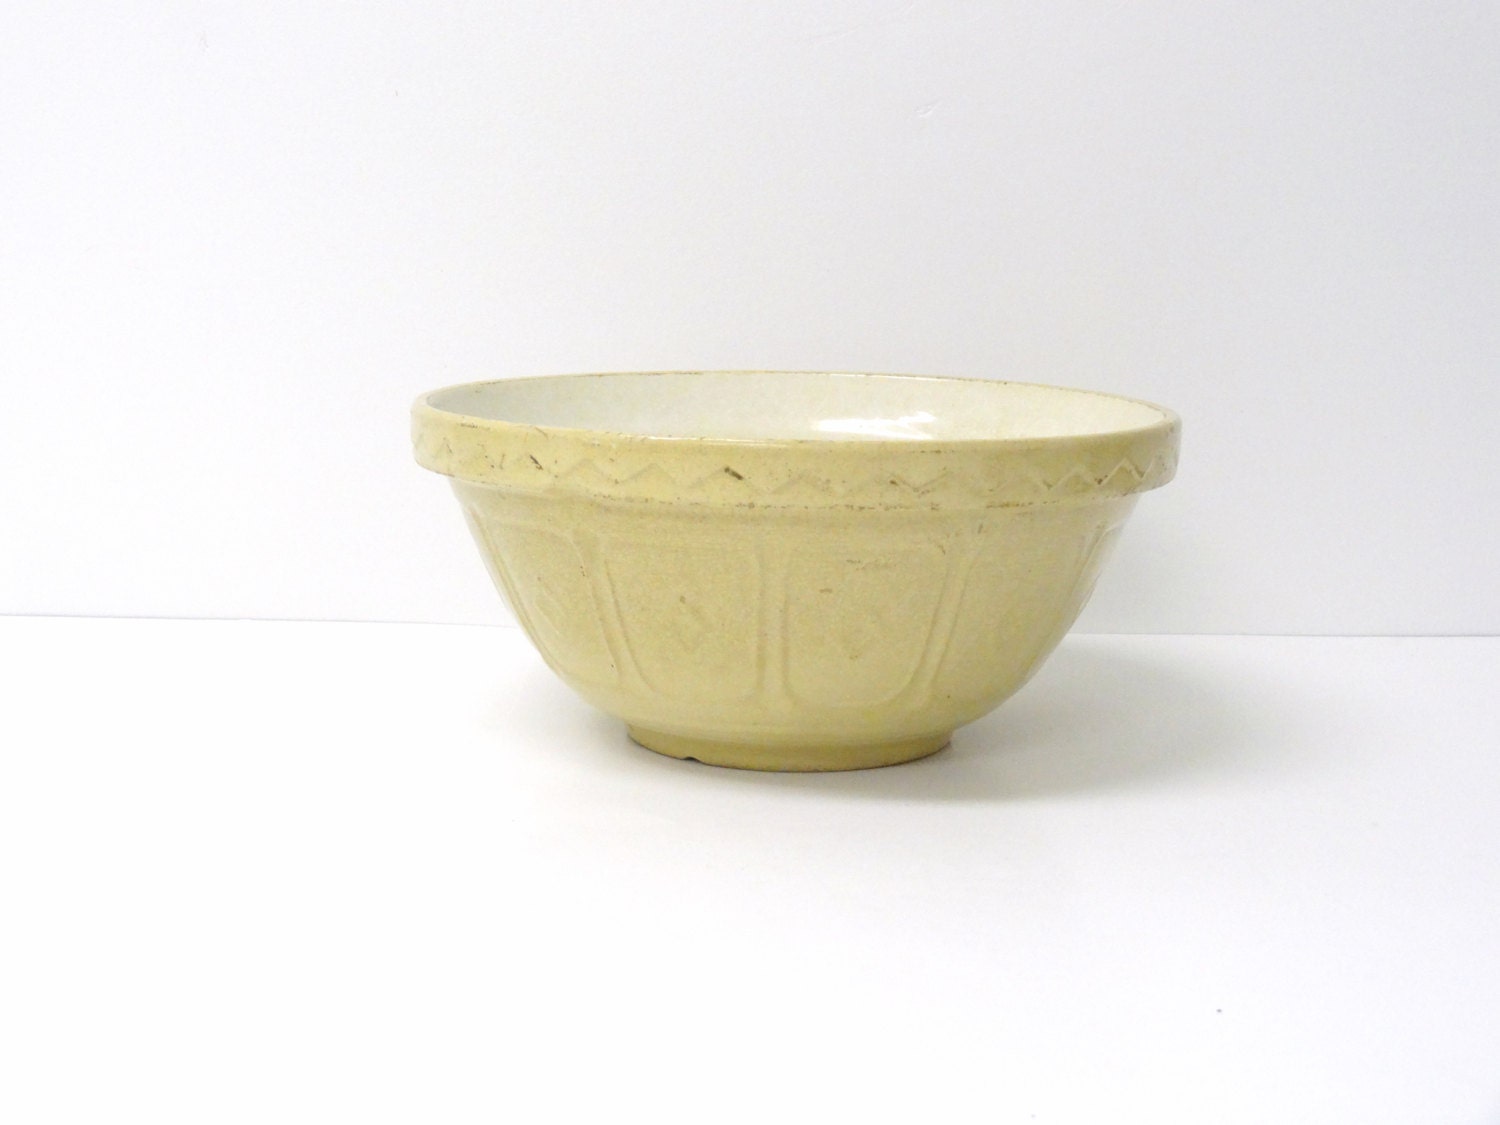 Antique Mason Yellow ware Stonware Bowl, Vintage Stoneware, Rustic Country Kitchen Decor - NewfoundFinds